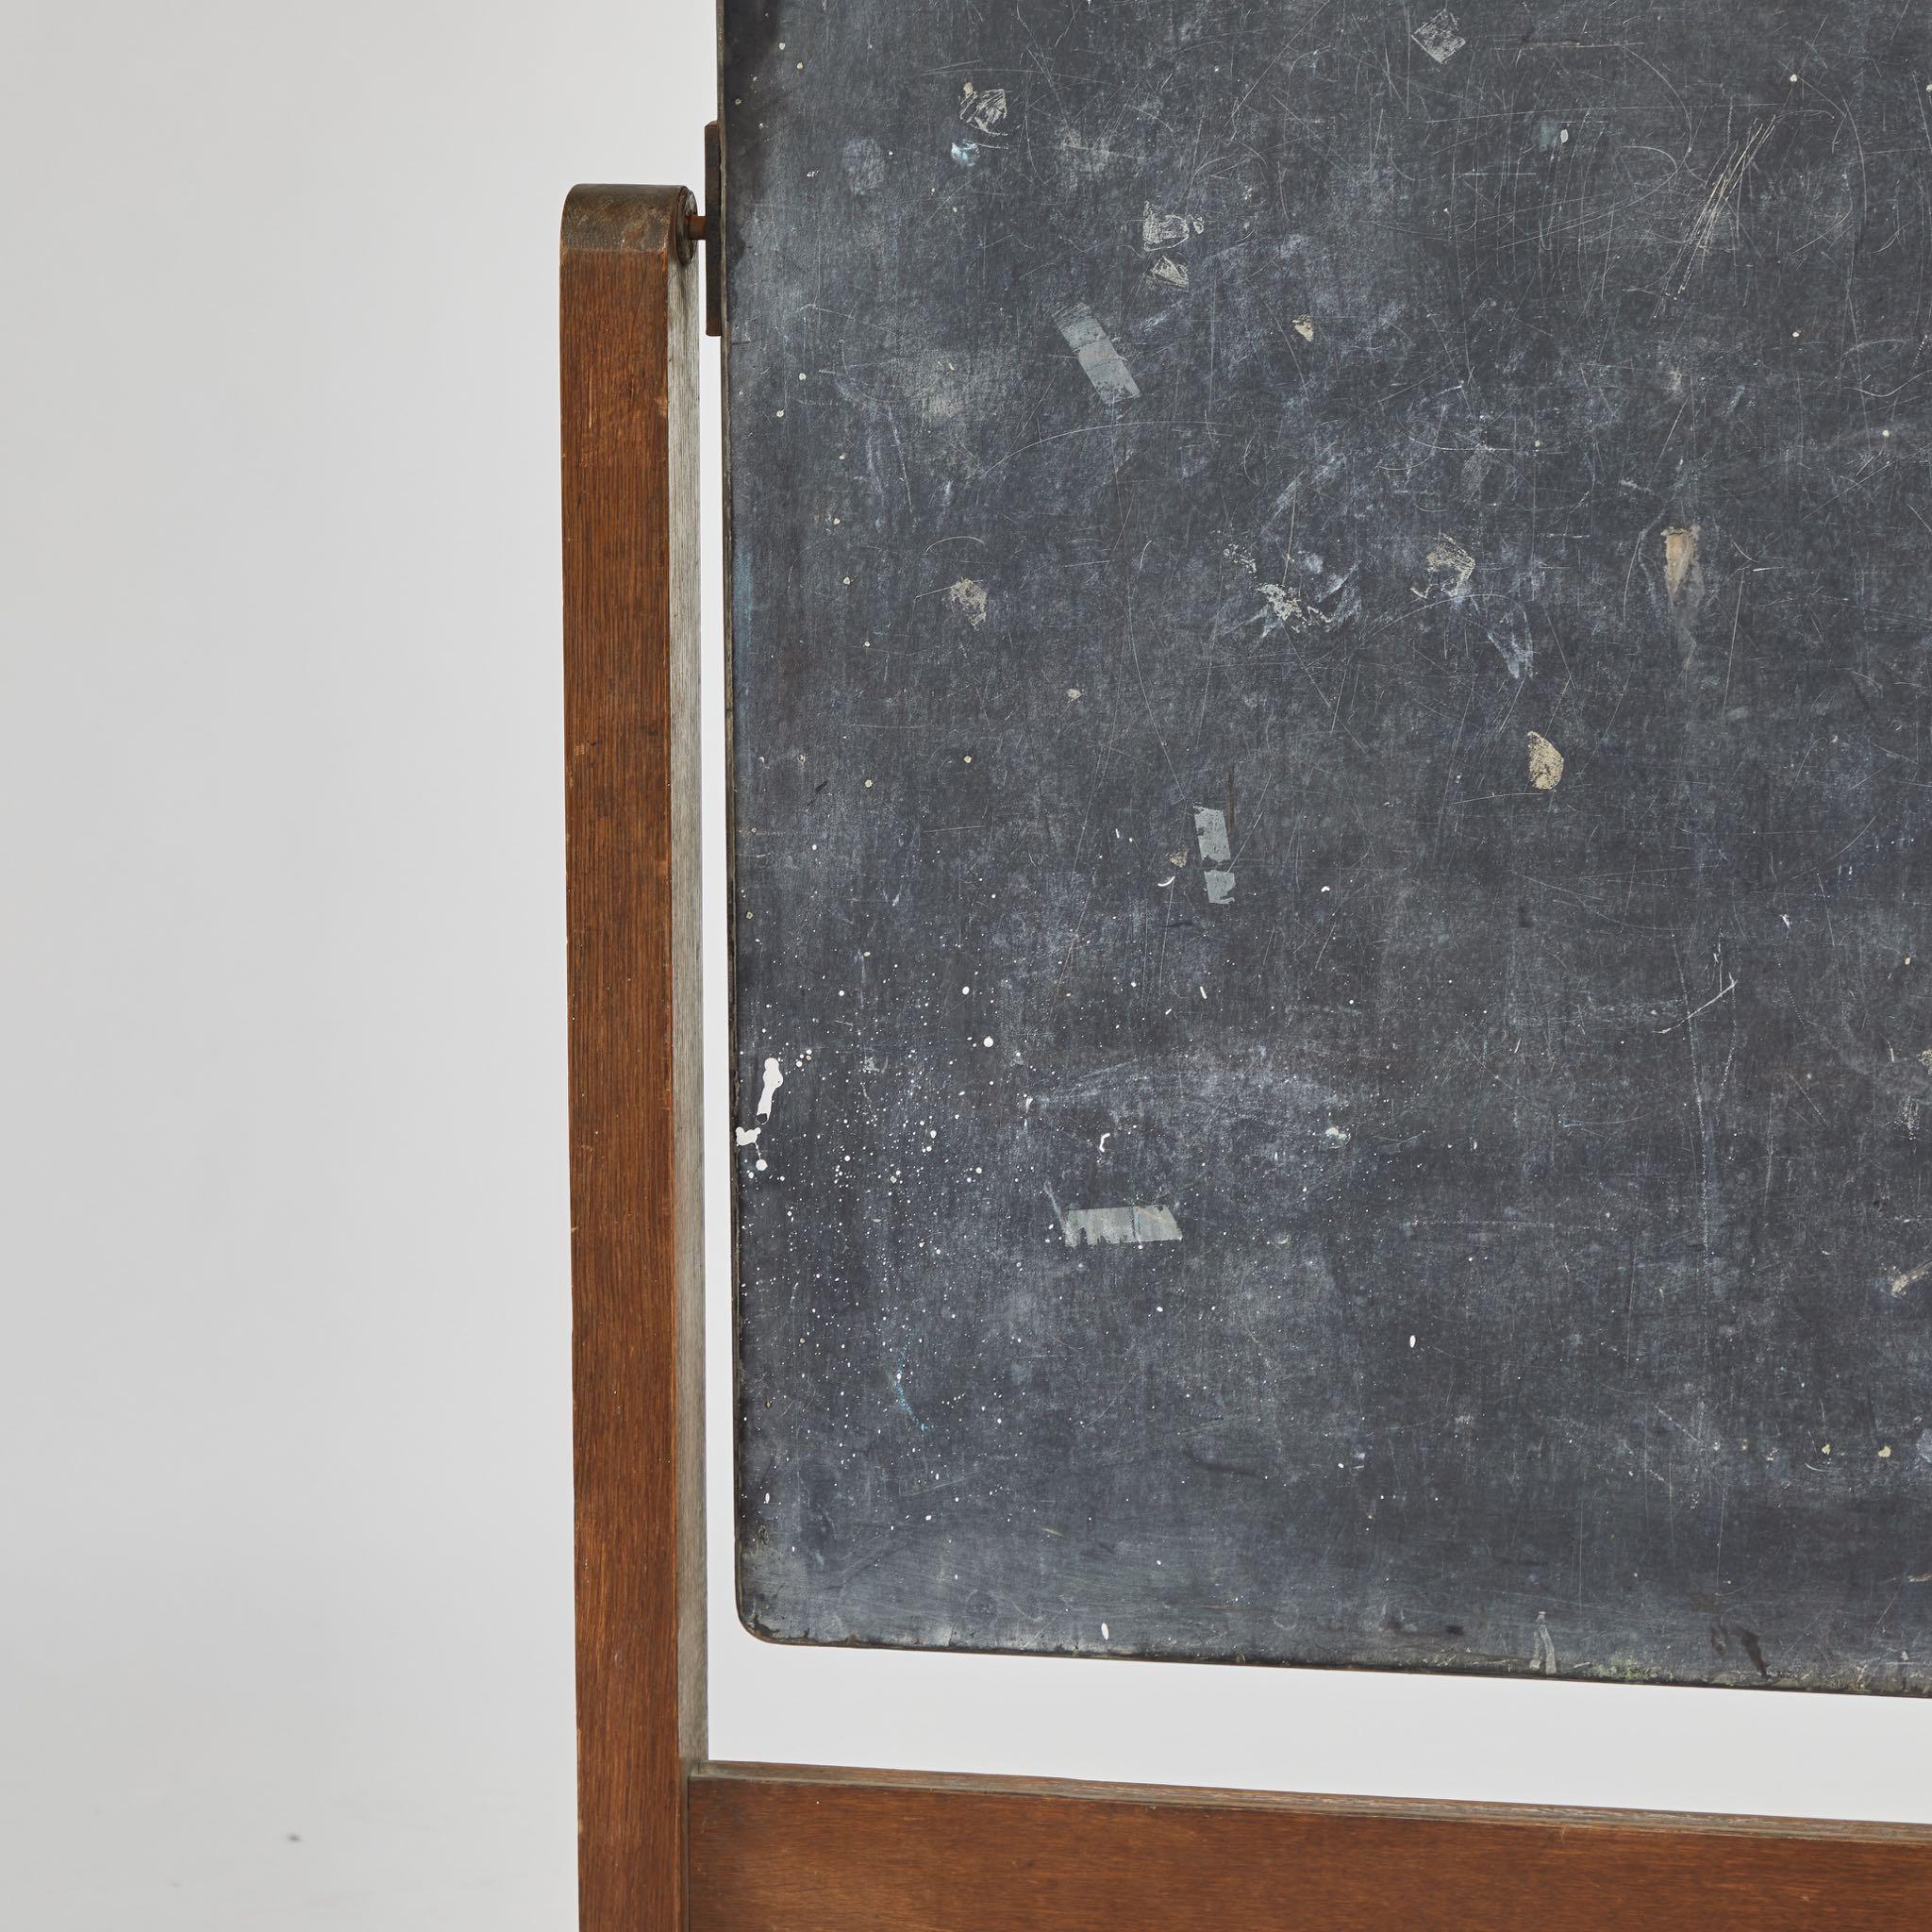 A chalkboard on stand with hinge, originating in England, circa 1910.